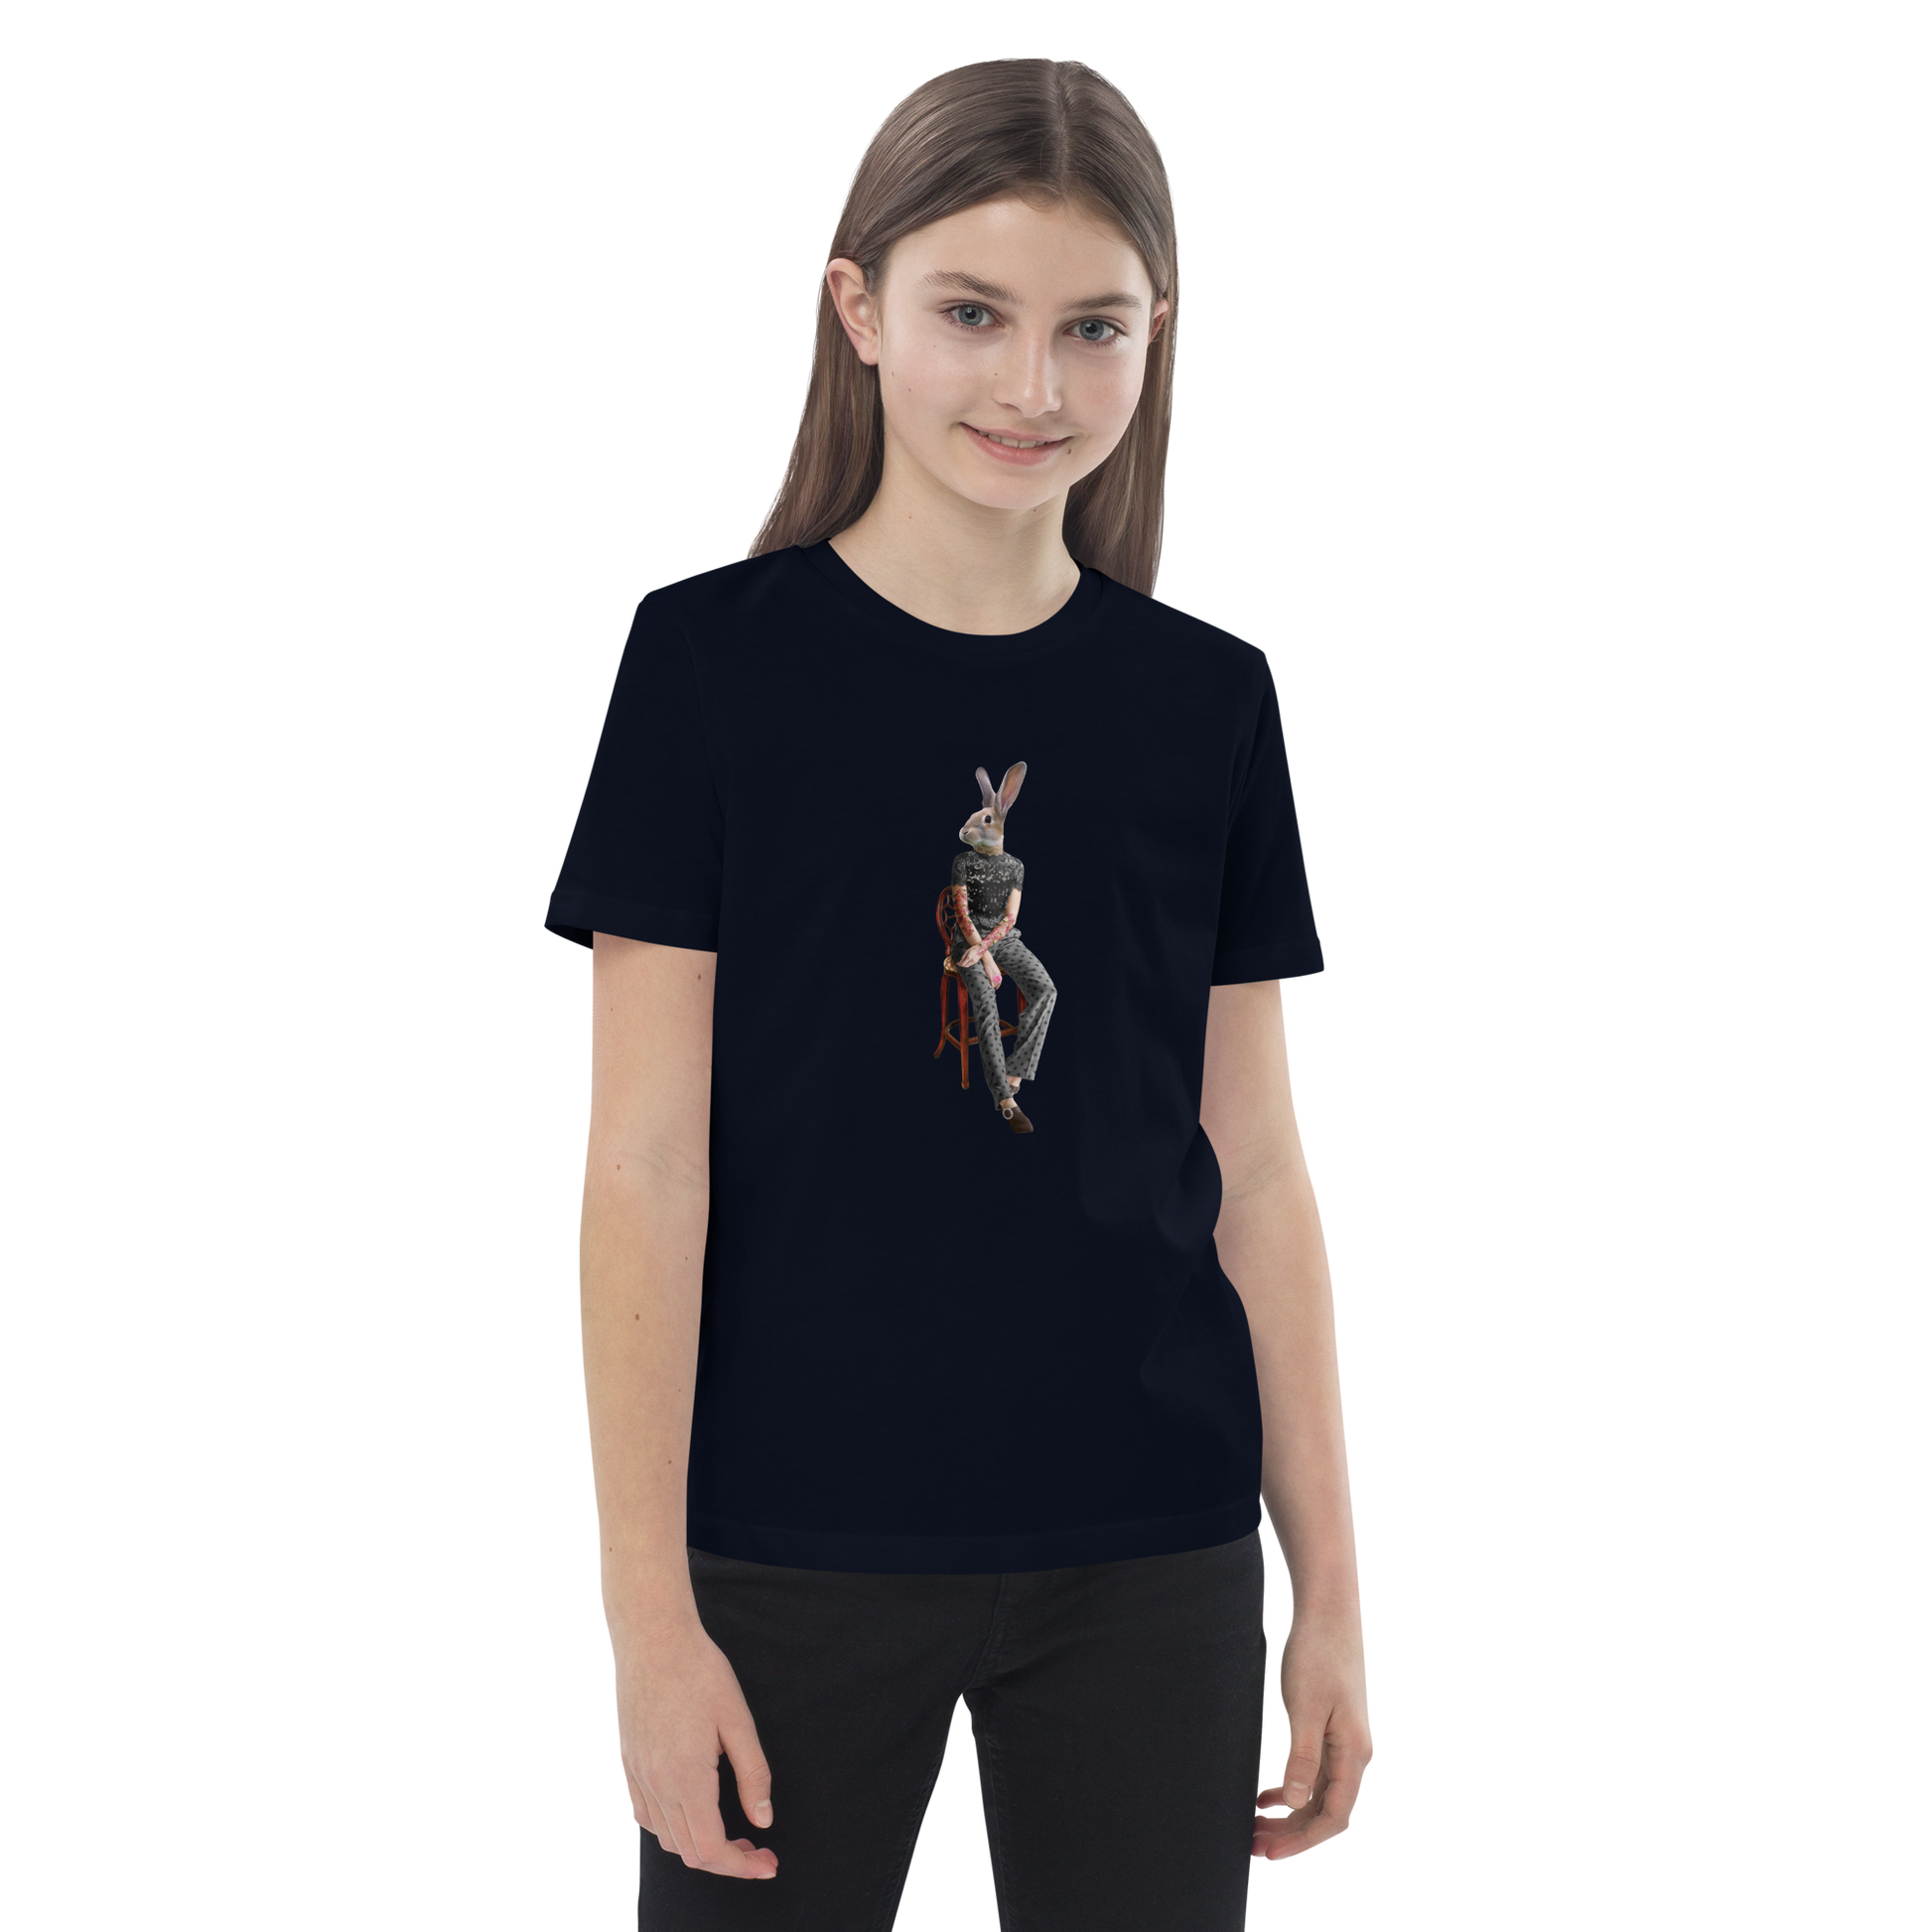 Young girl wearing a French Navy Anthropomorphic Rabbit Organic Cotton Kids T-Shirt featuring an Anthropomorphic Rabbit graphic on the chest - Kids' Graphic Tees - Funny Animal T-Shirts - Boozy Fox